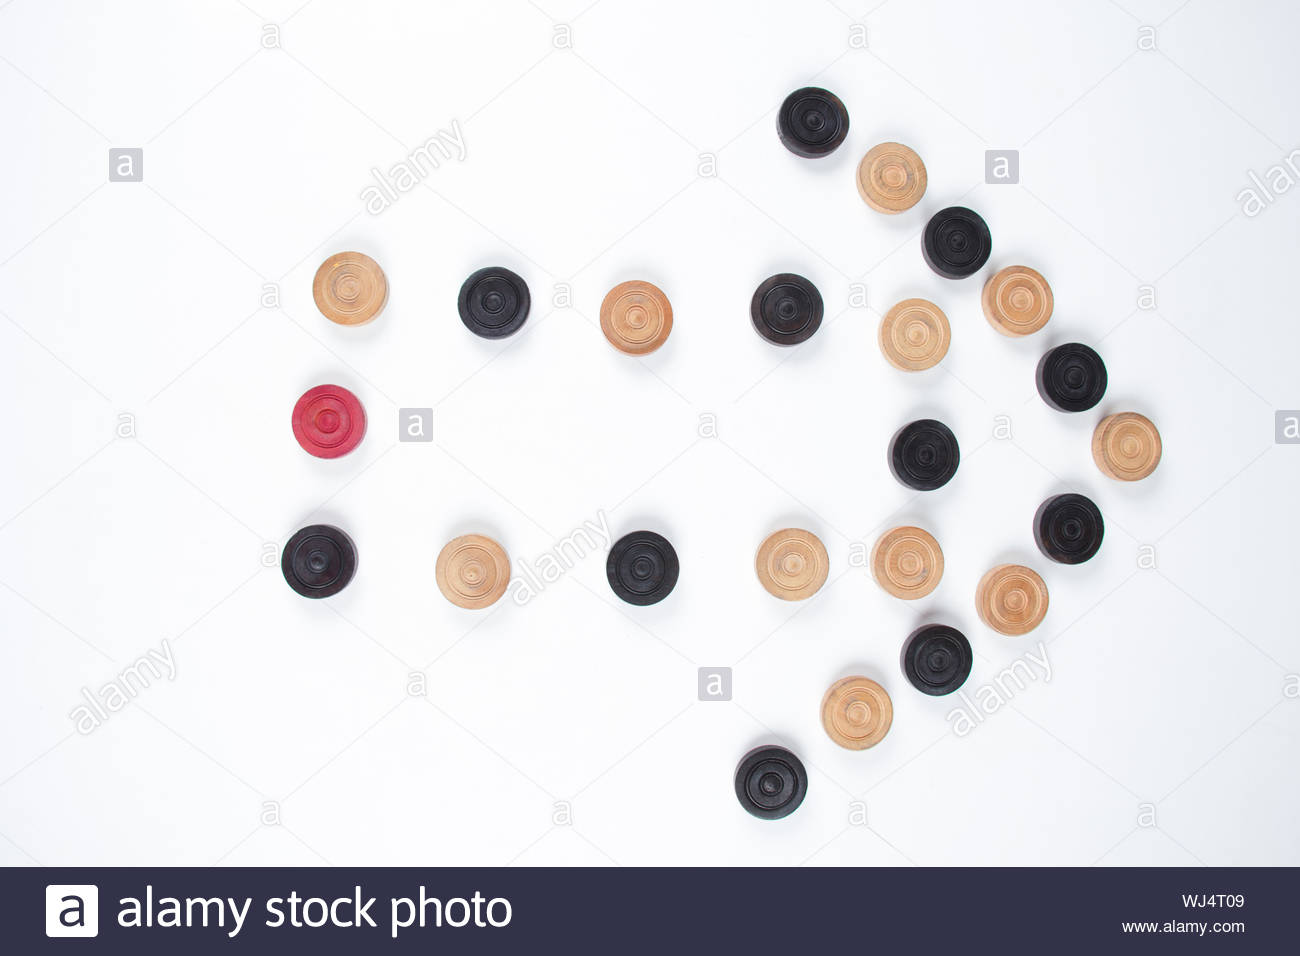 Carrom Pieces In Shape Of Arrow Sign Isolated On White Background